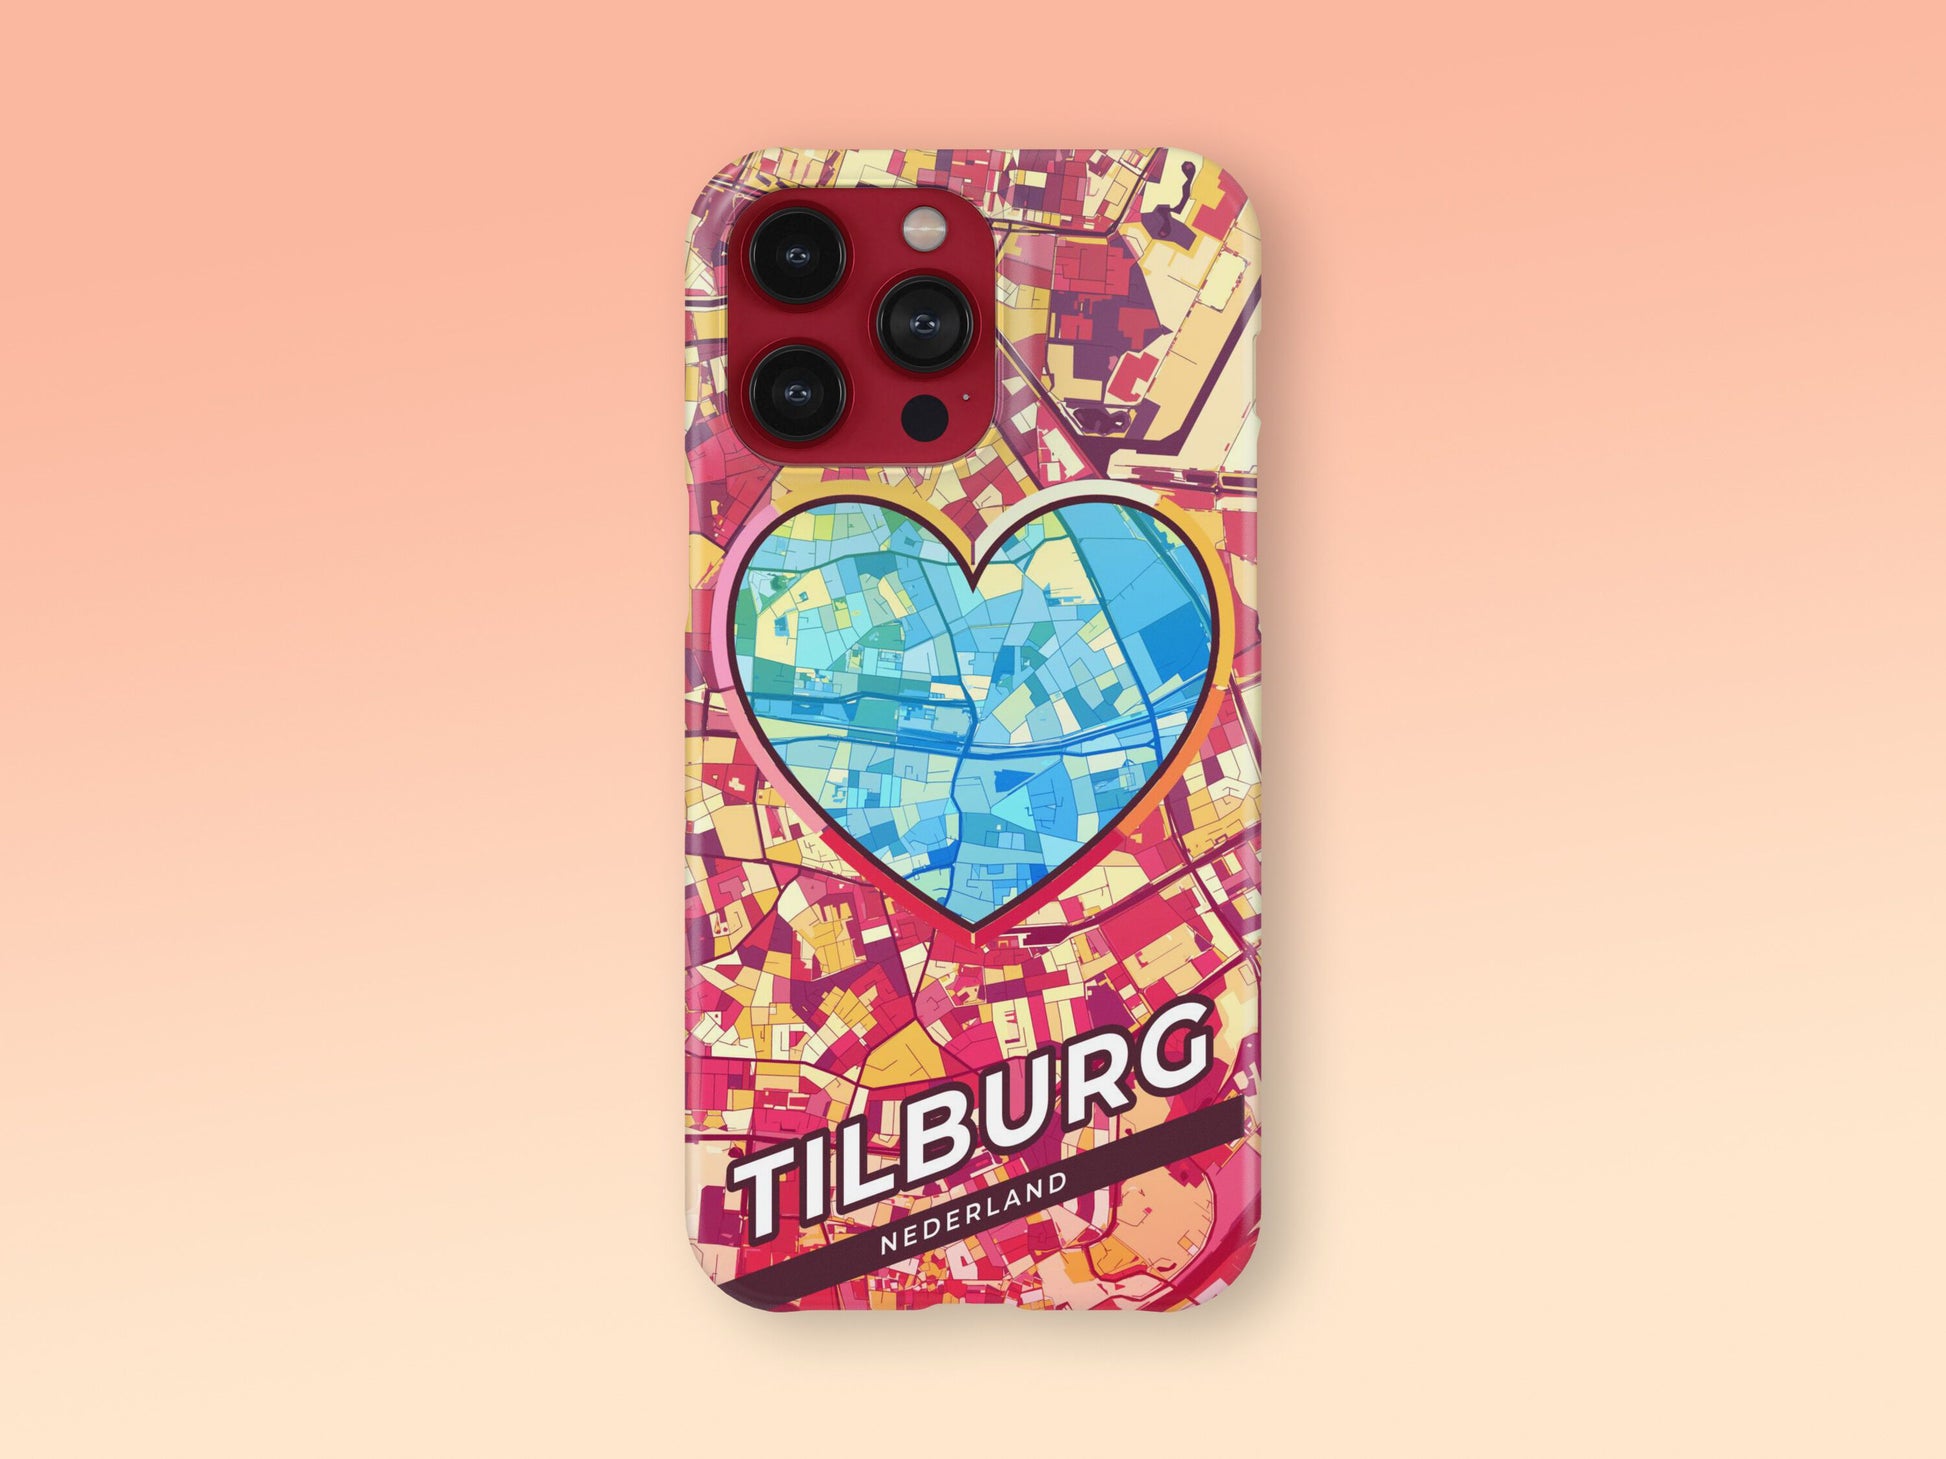 Tilburg Netherlands slim phone case with colorful icon 2